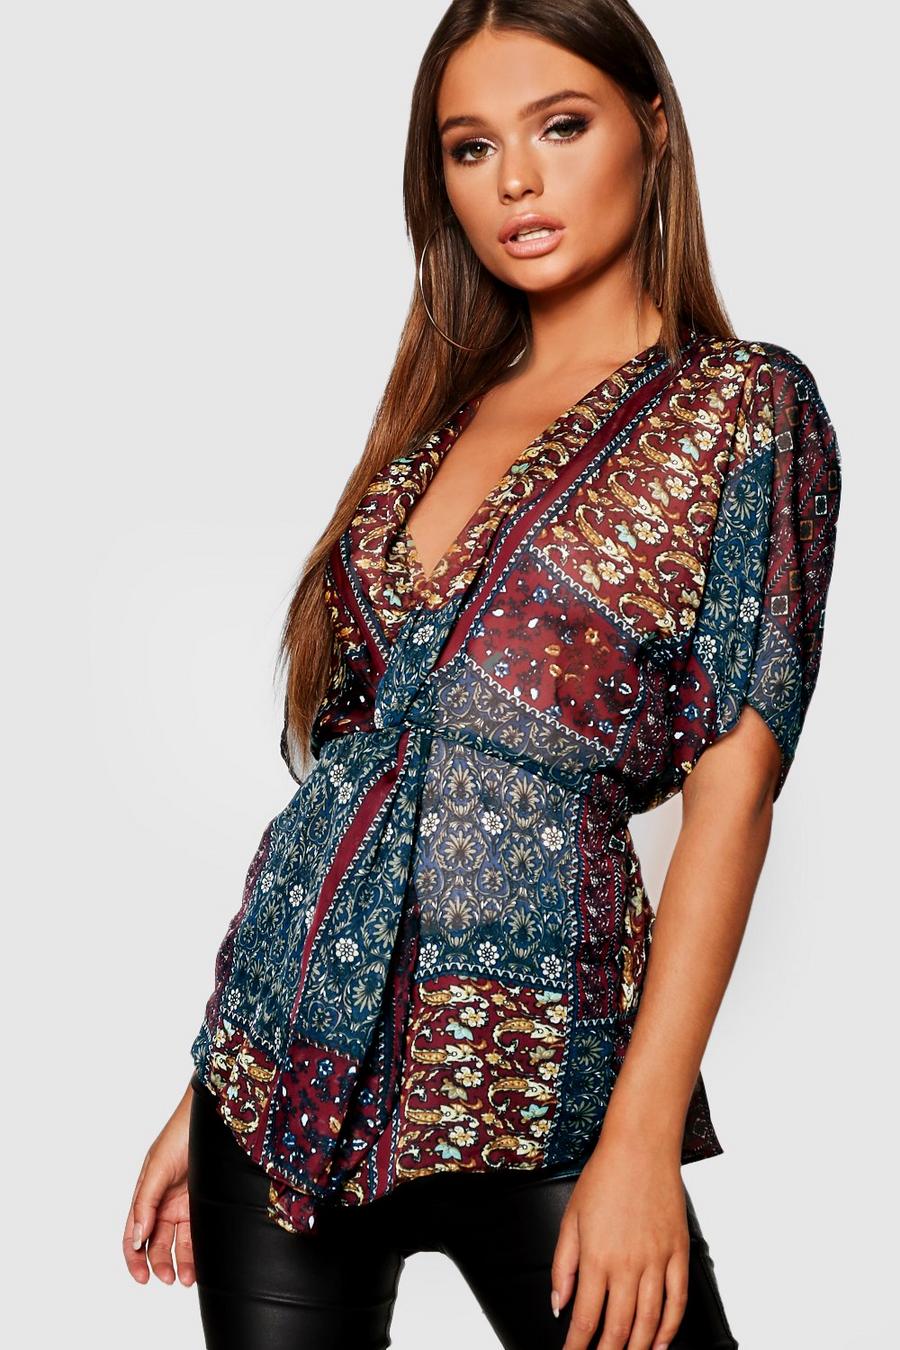 Berry rouge Opgeknoopte Boho Blouse